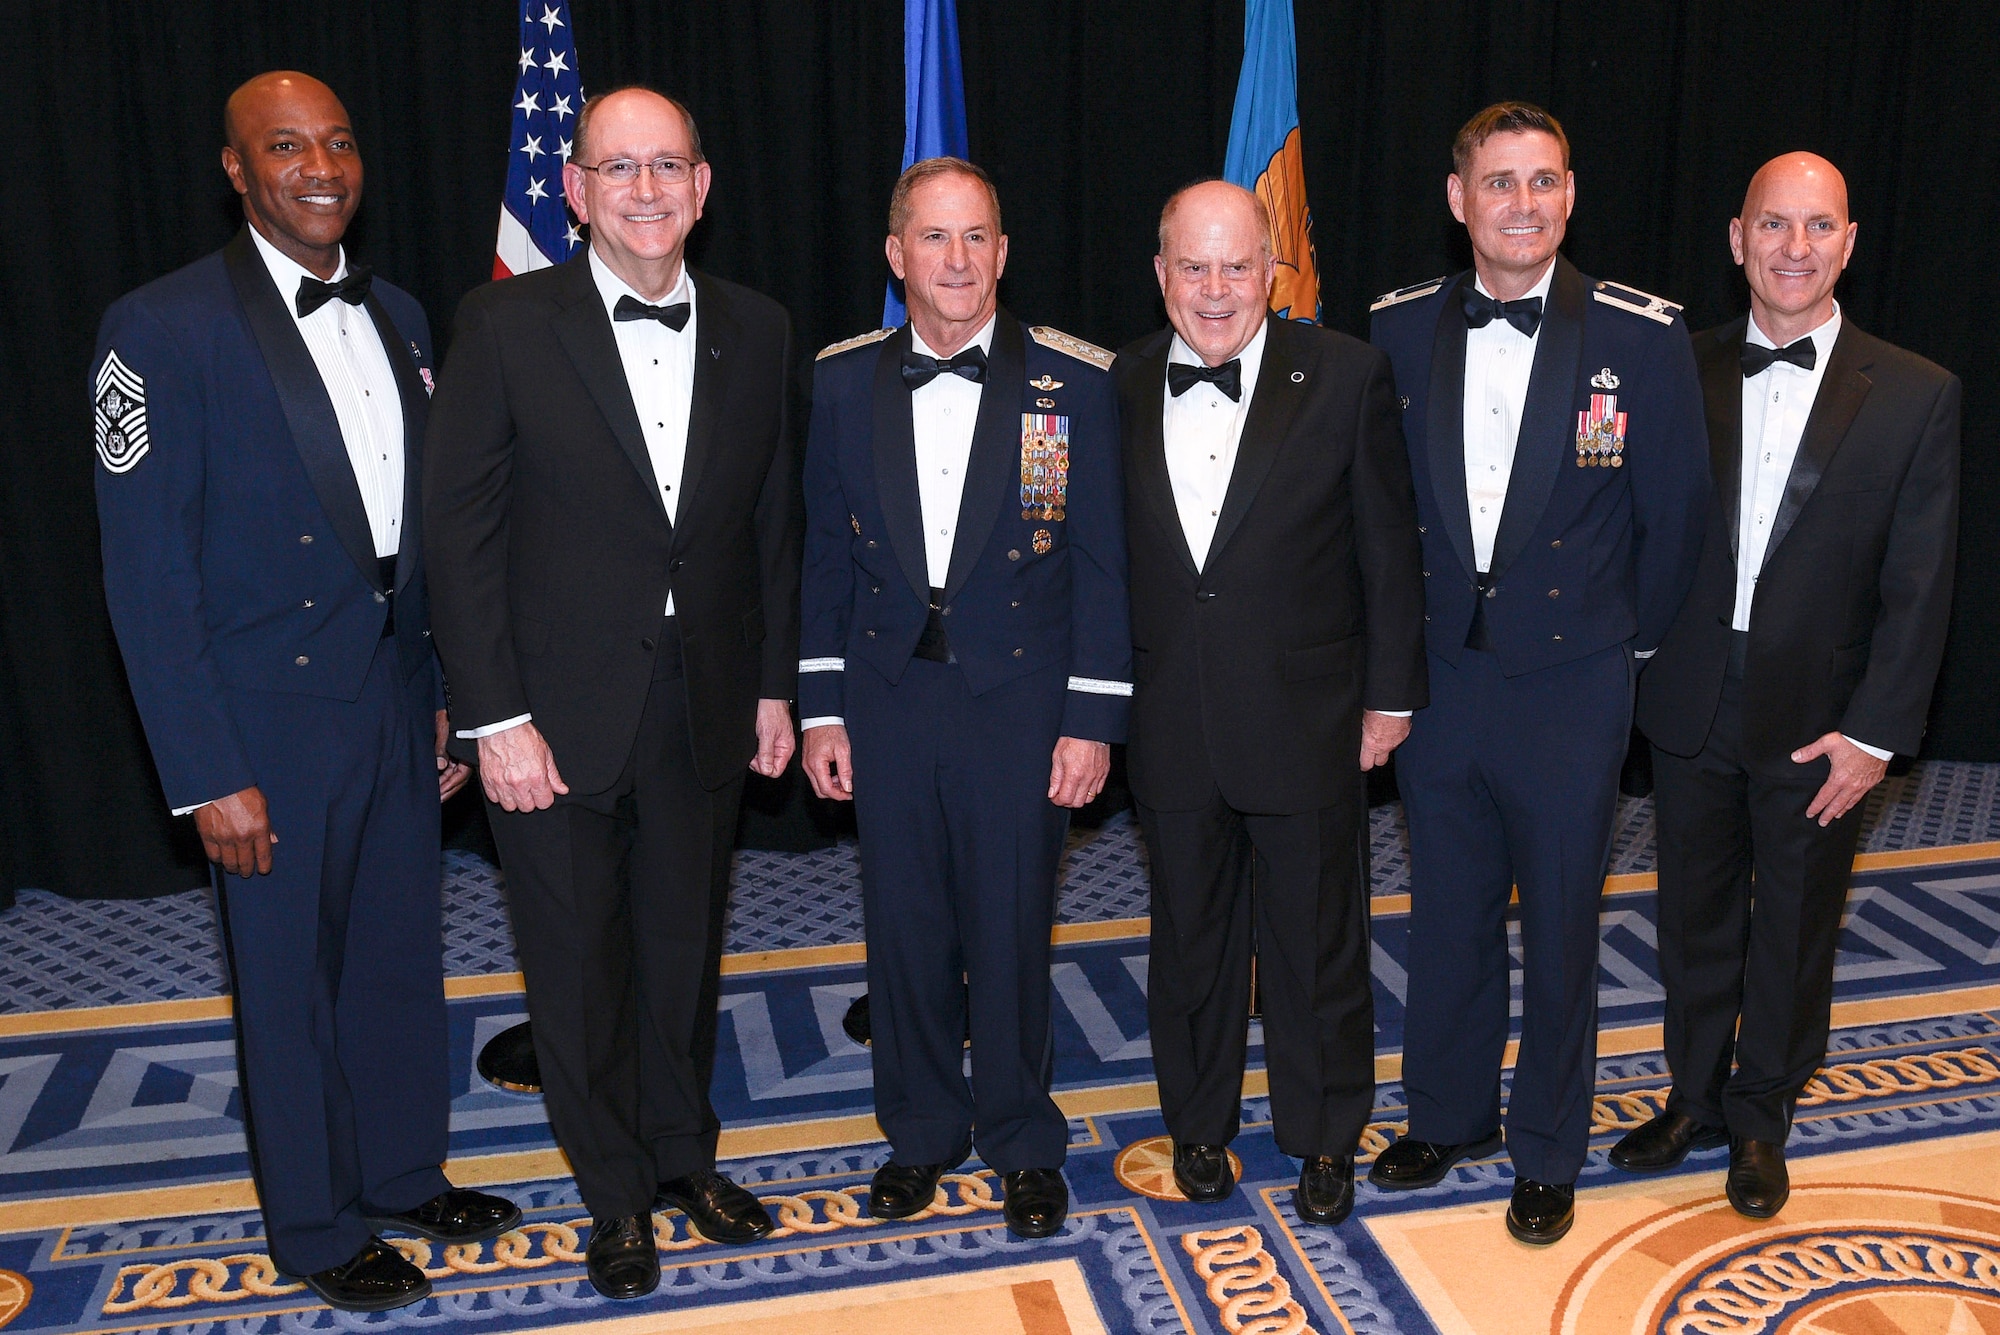 Chief Master Sergeant of the Air Force Kaleth O. Wright, Acting Secretary of the Air Force Matthew P. Donovan, Chief of Staff of the Air Force Gen. David L. Goldfein, Air Force Association Chairman of the Board F. Whitten Peters, Col. Stephen Sanders, Air Force JROTC director, and Todd Taylor, Air Force JROTC chief of program development, pose before the Air Force Birthday Dinner in National Harbor, Maryland, Sept. 18, 2019. Peters presented Air Force JROTC with the AFA Chairman’s Award for Aerospace Education Achievement to recognize the work of 120,000 cadets, more than 1,900 instructors and headquarters staff on promoting and advocating aerospace education and science, technology, engineering and math programs.